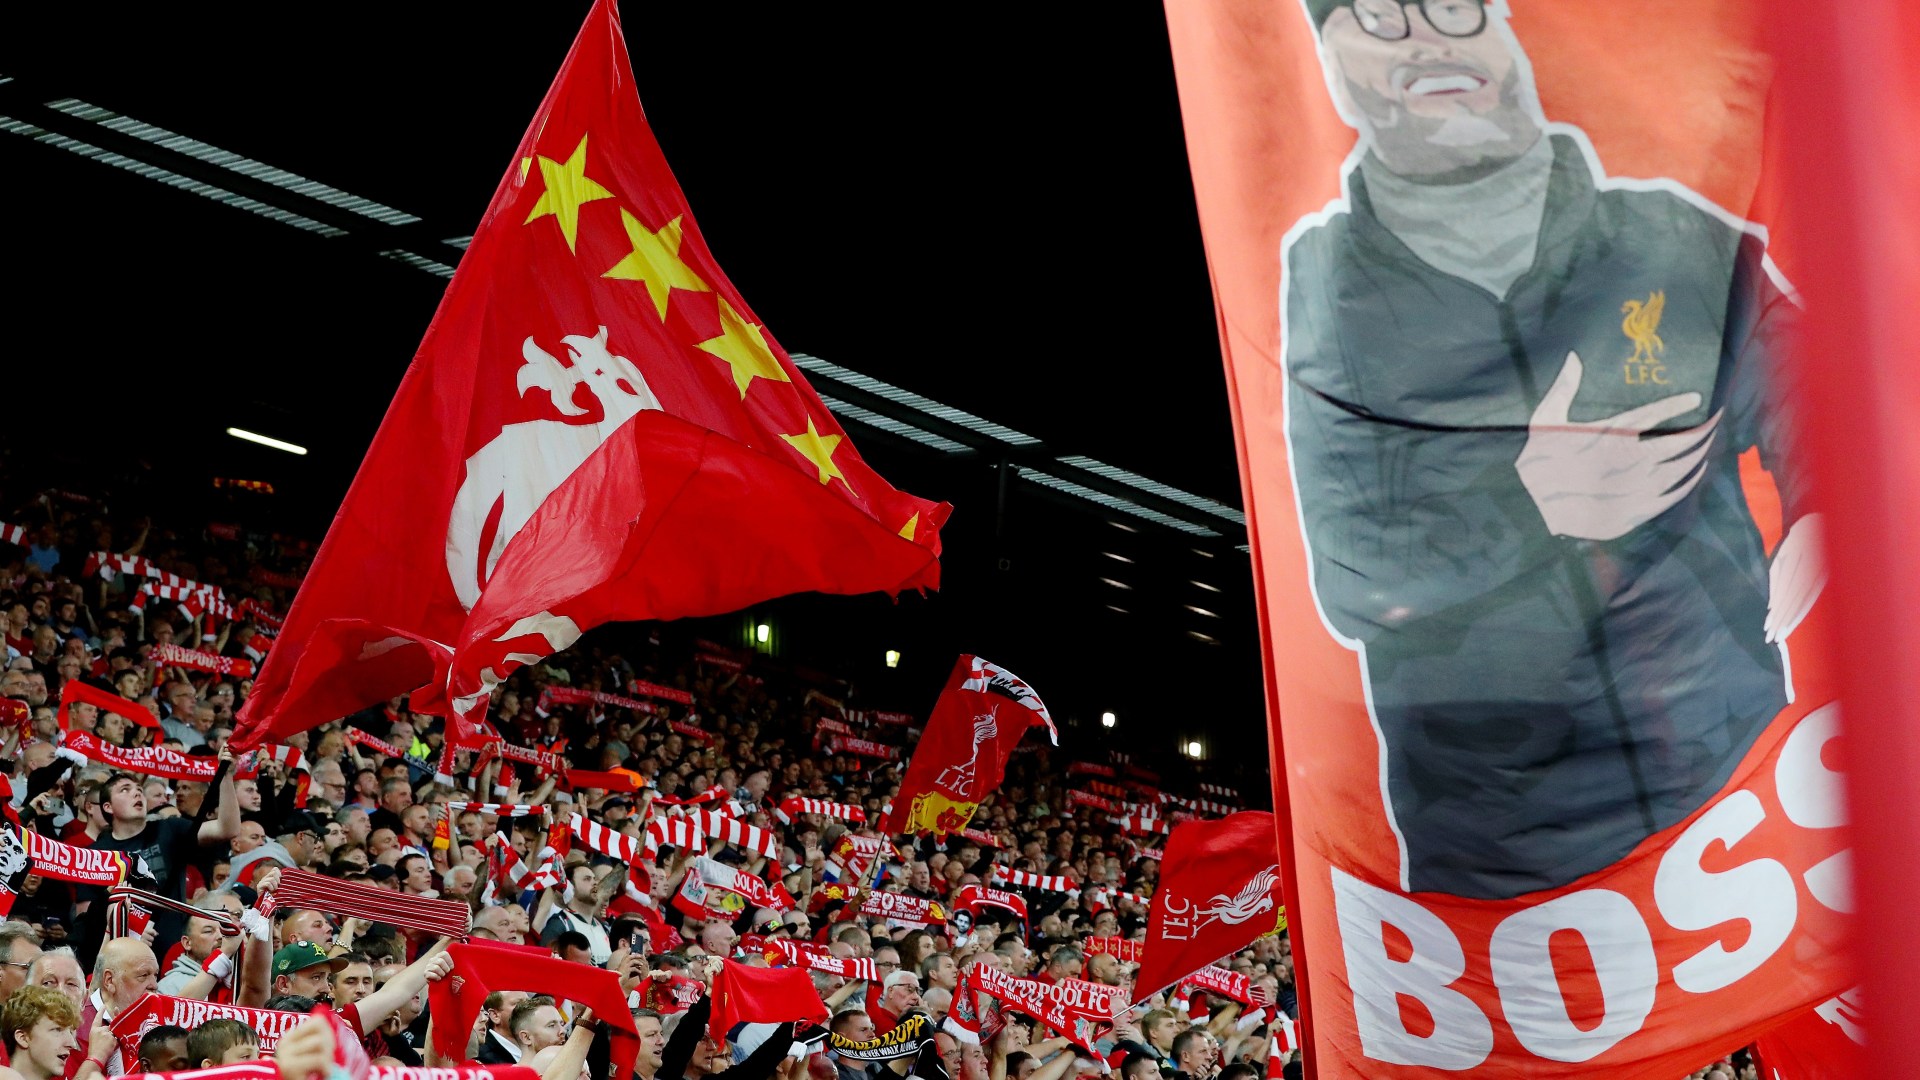 Anfield set to look completely different as Liverpool fans plot unique protest ahead of Europa League clash